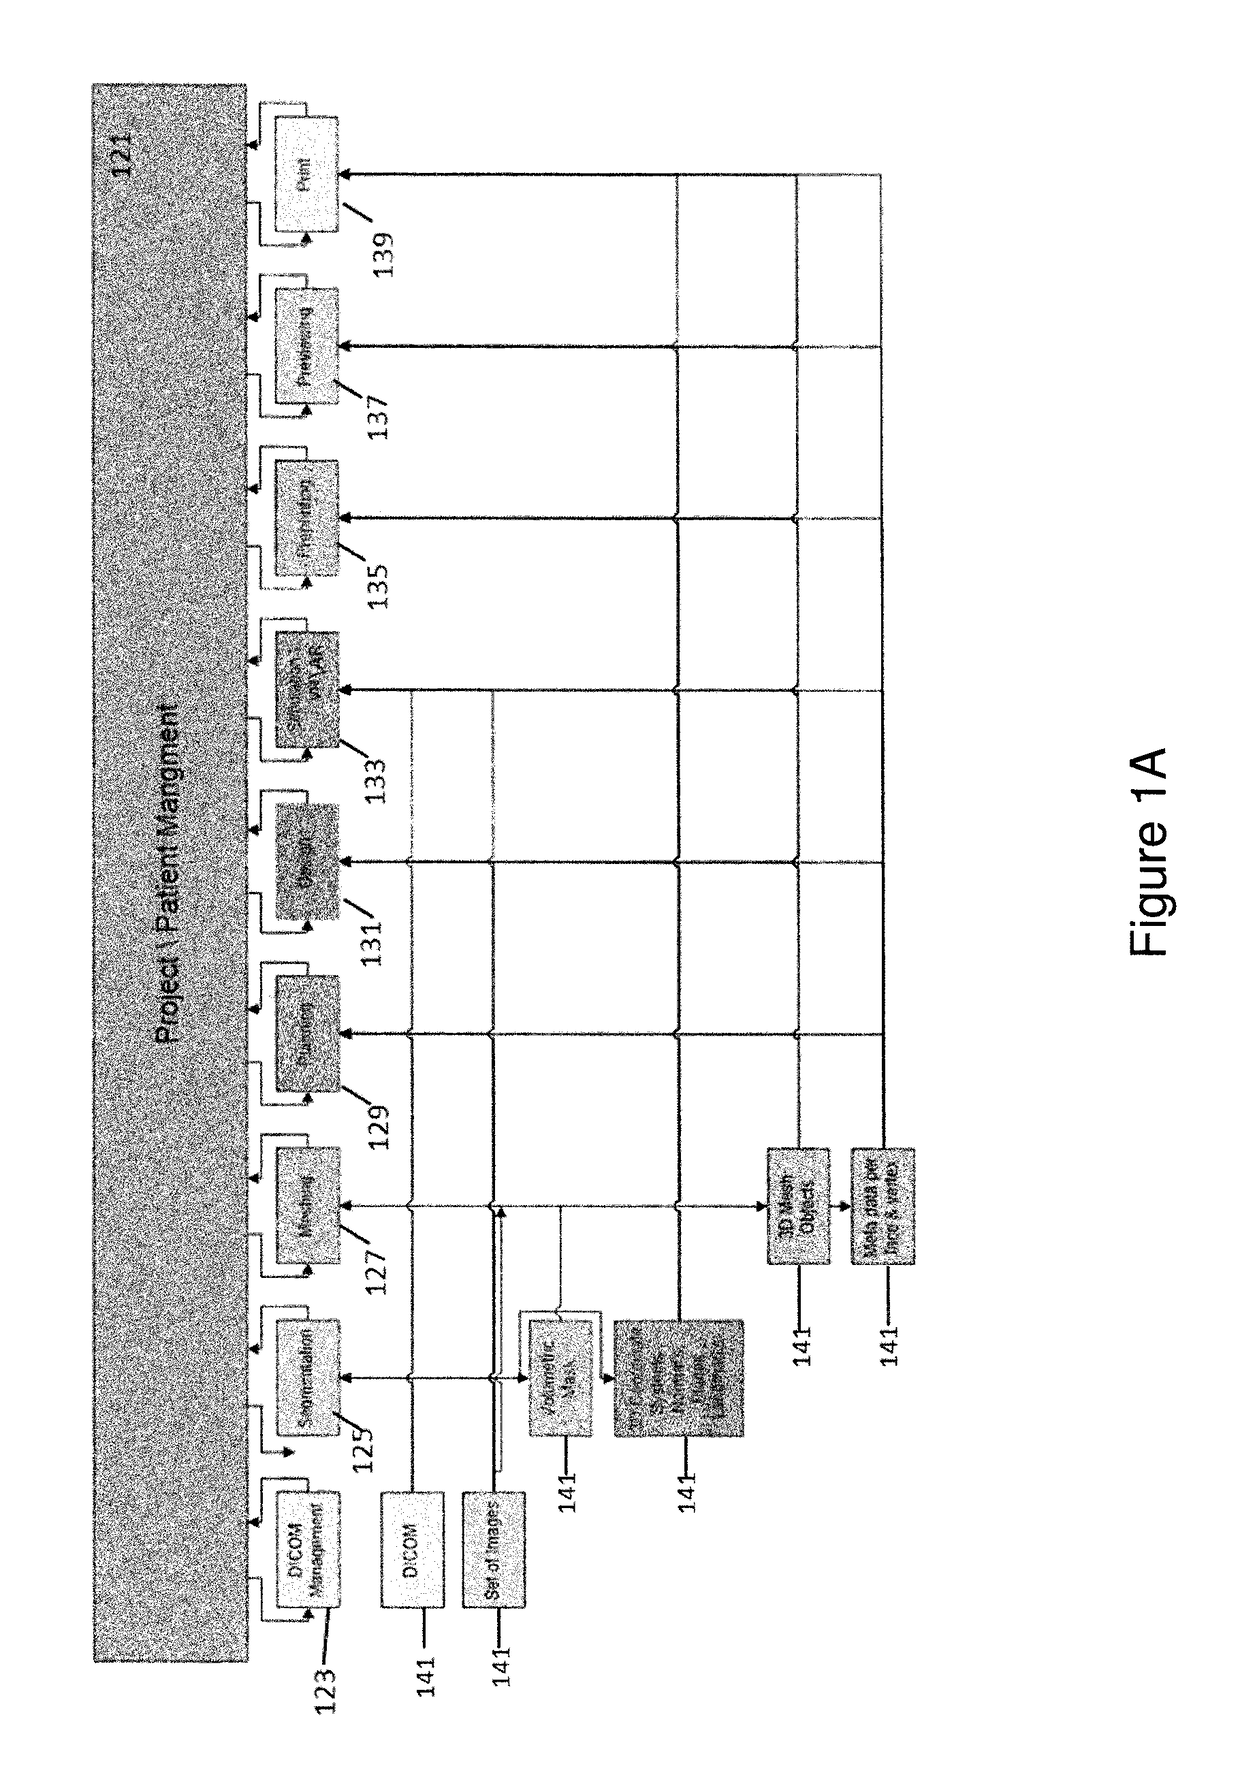 Systems and methods for an integrated system for visualizing, simulating, modifying and 3D printing 3D objects